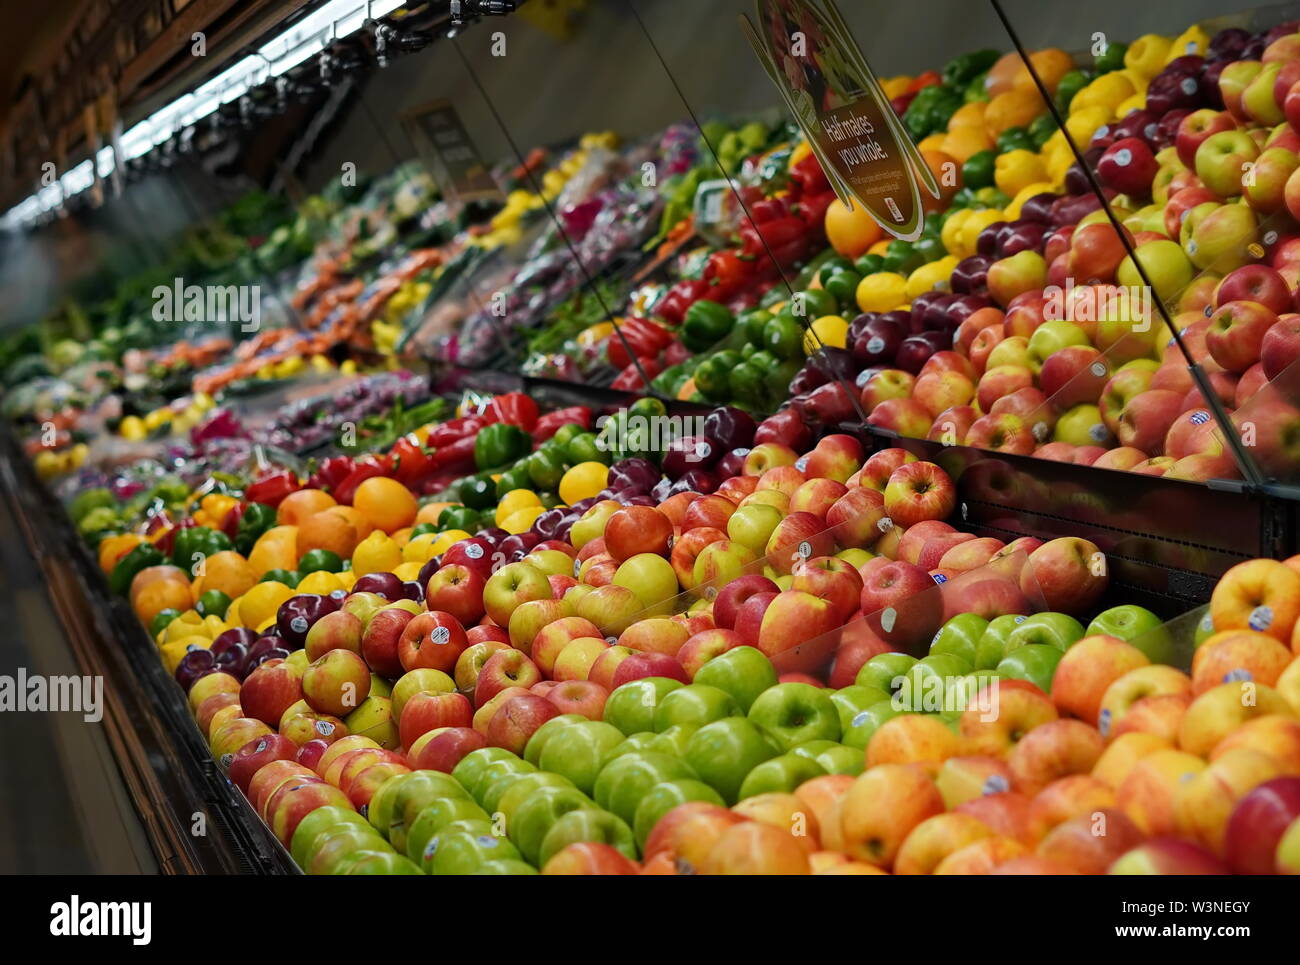 New London, CT / USA - June 2, 2019: Produce aisle at the grocery store Stock Photo